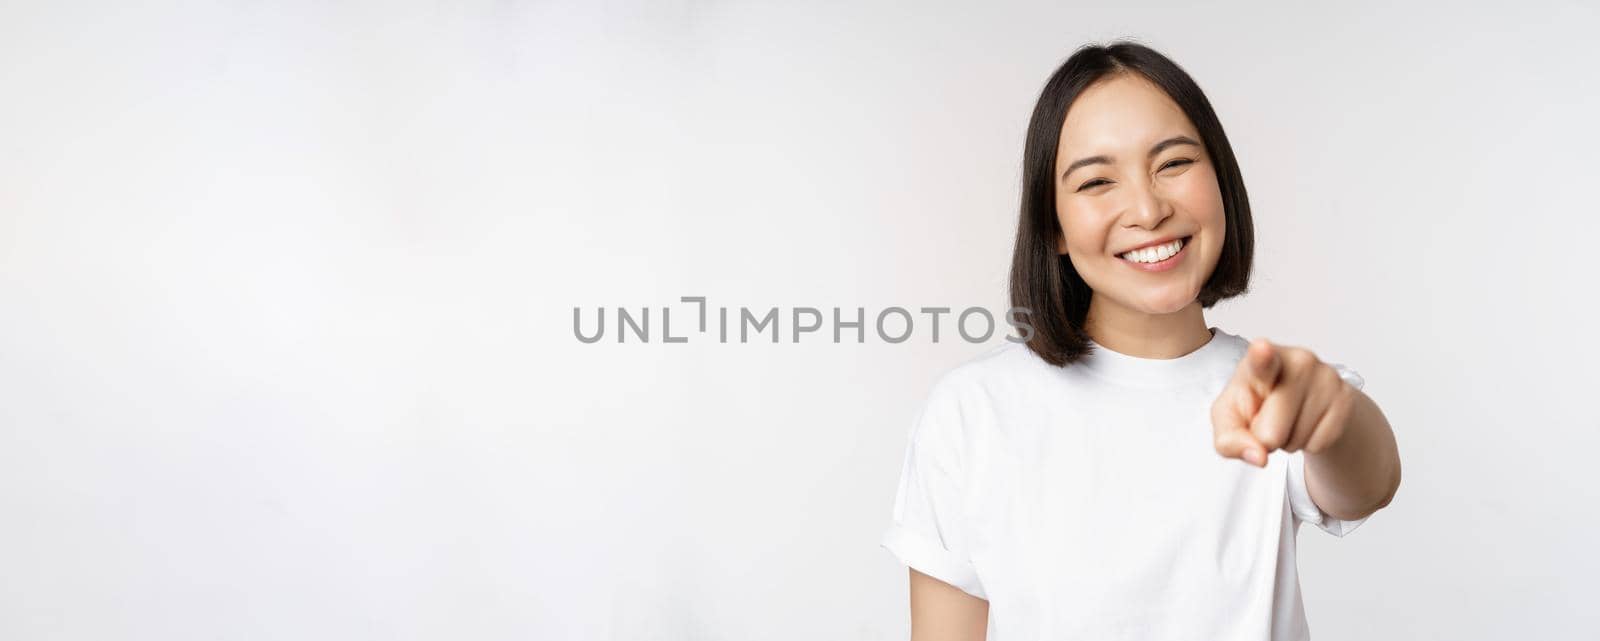 Portrait of happy smiling asian woman with white teeth, pointing finger at camera, choosing you, congratulating, standing over white background.